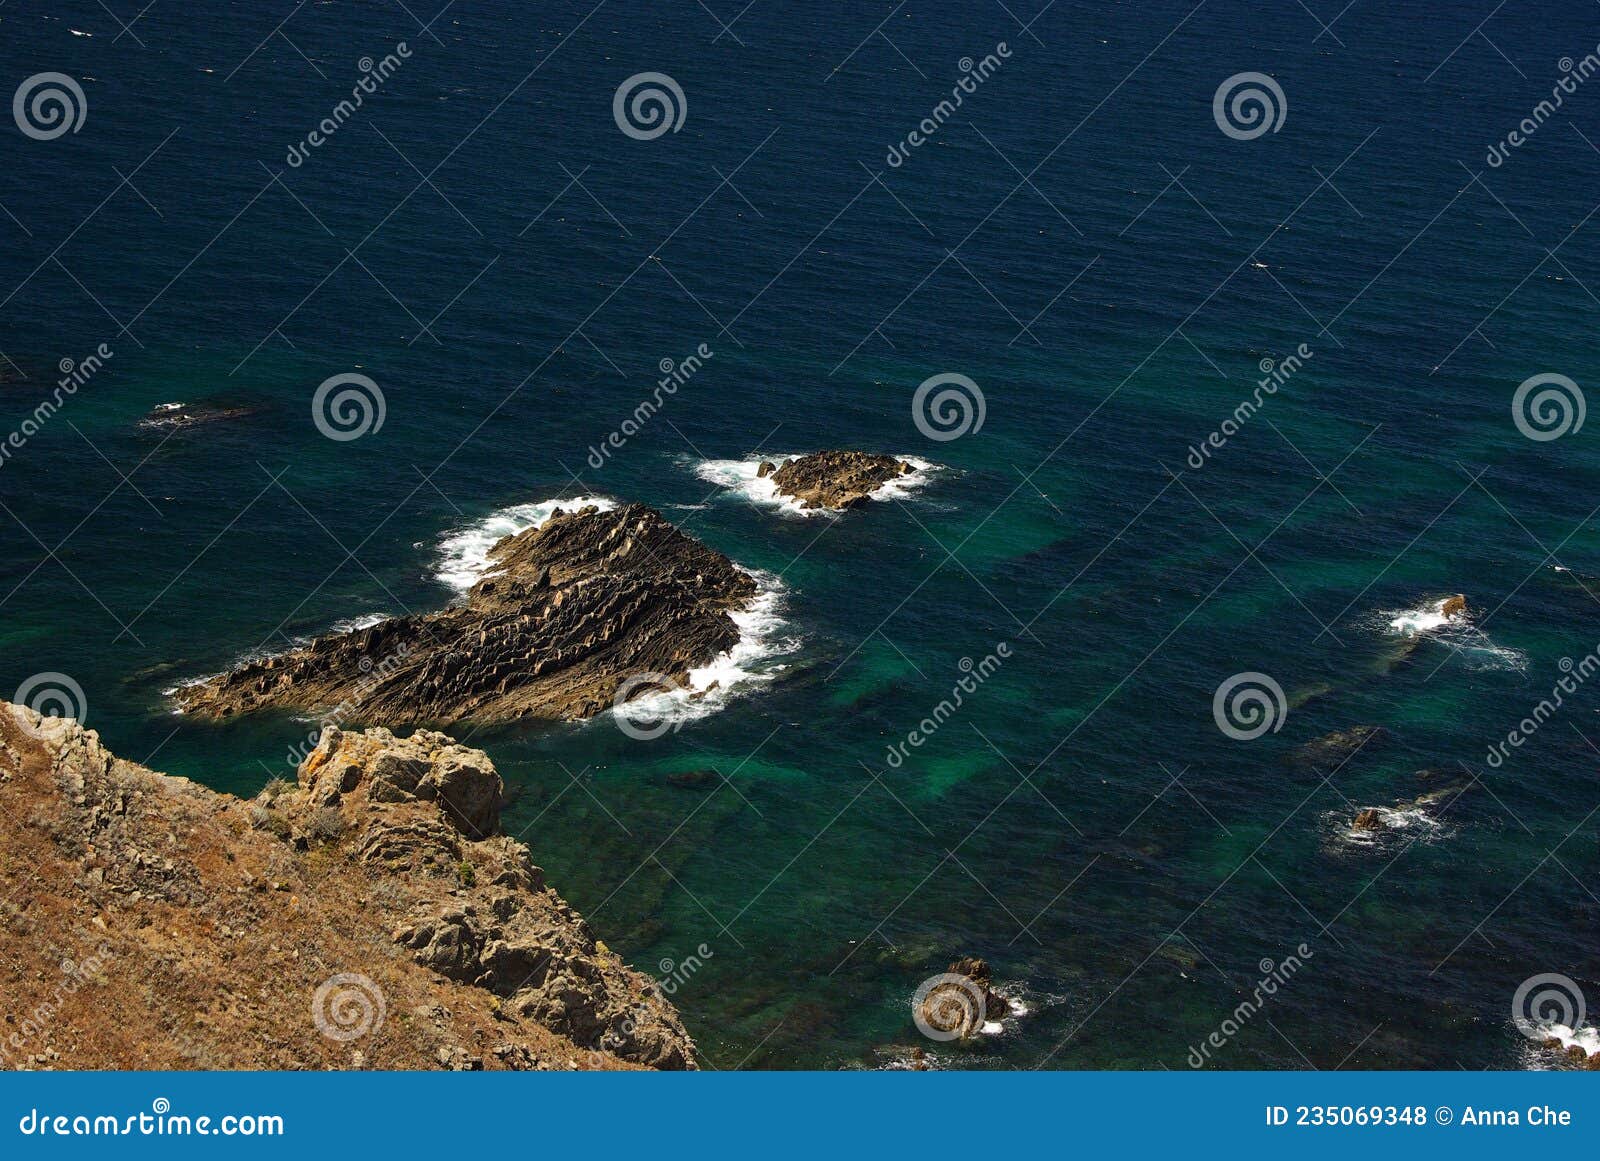 a view from above on the rocks of arrifana bay with ransparent turquose water